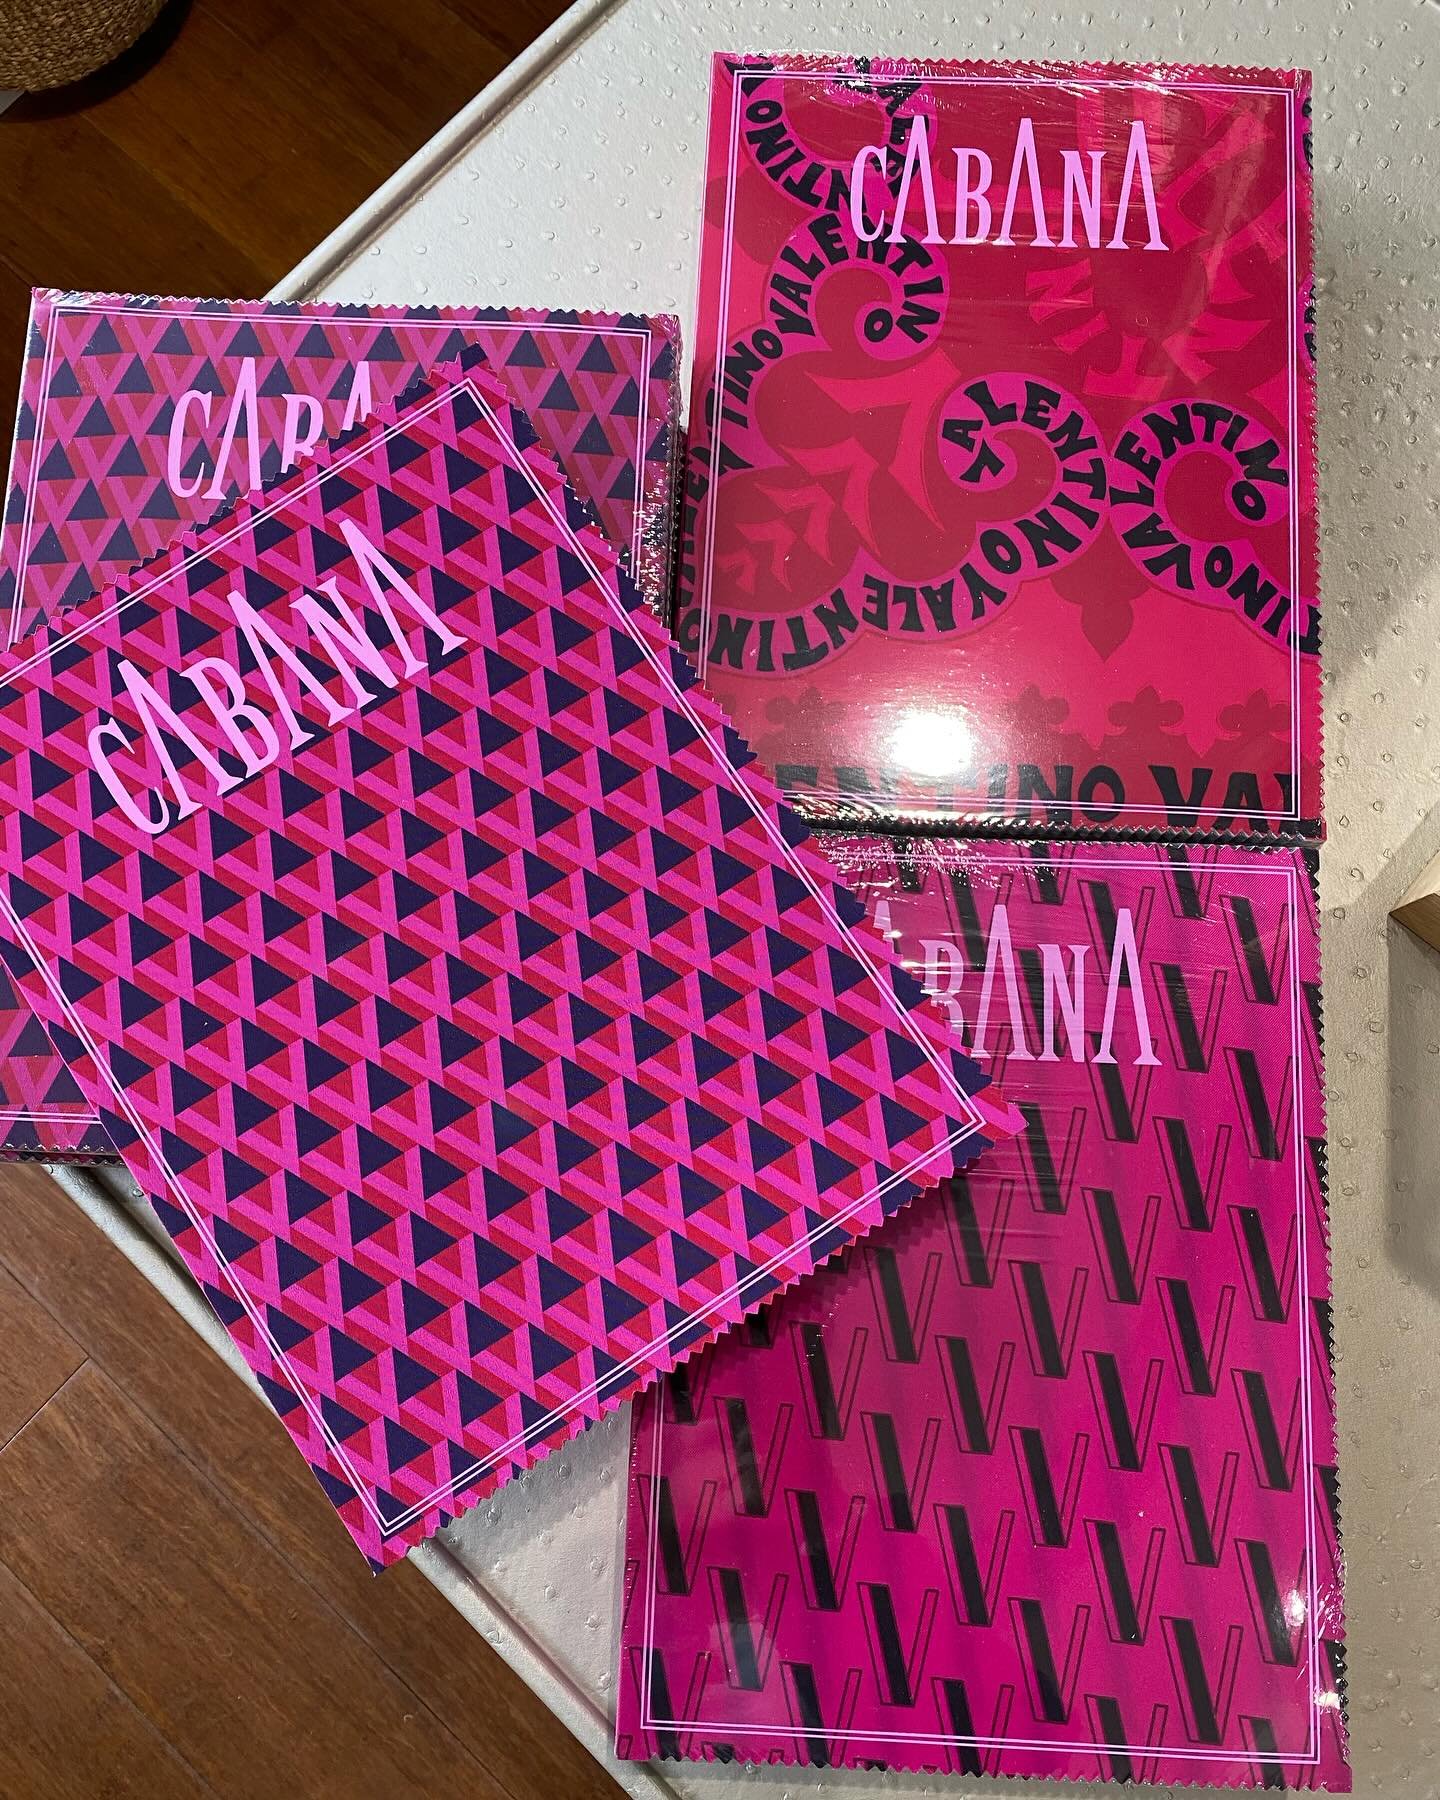 New issues of Cabana Magazine arrived in store today! Covers by Valentino! Check out the cut edges and glam photography. If you&rsquo;re a lover of fashion or interior design this is the most beautiful magazine on the market ! Stop in for your copy s